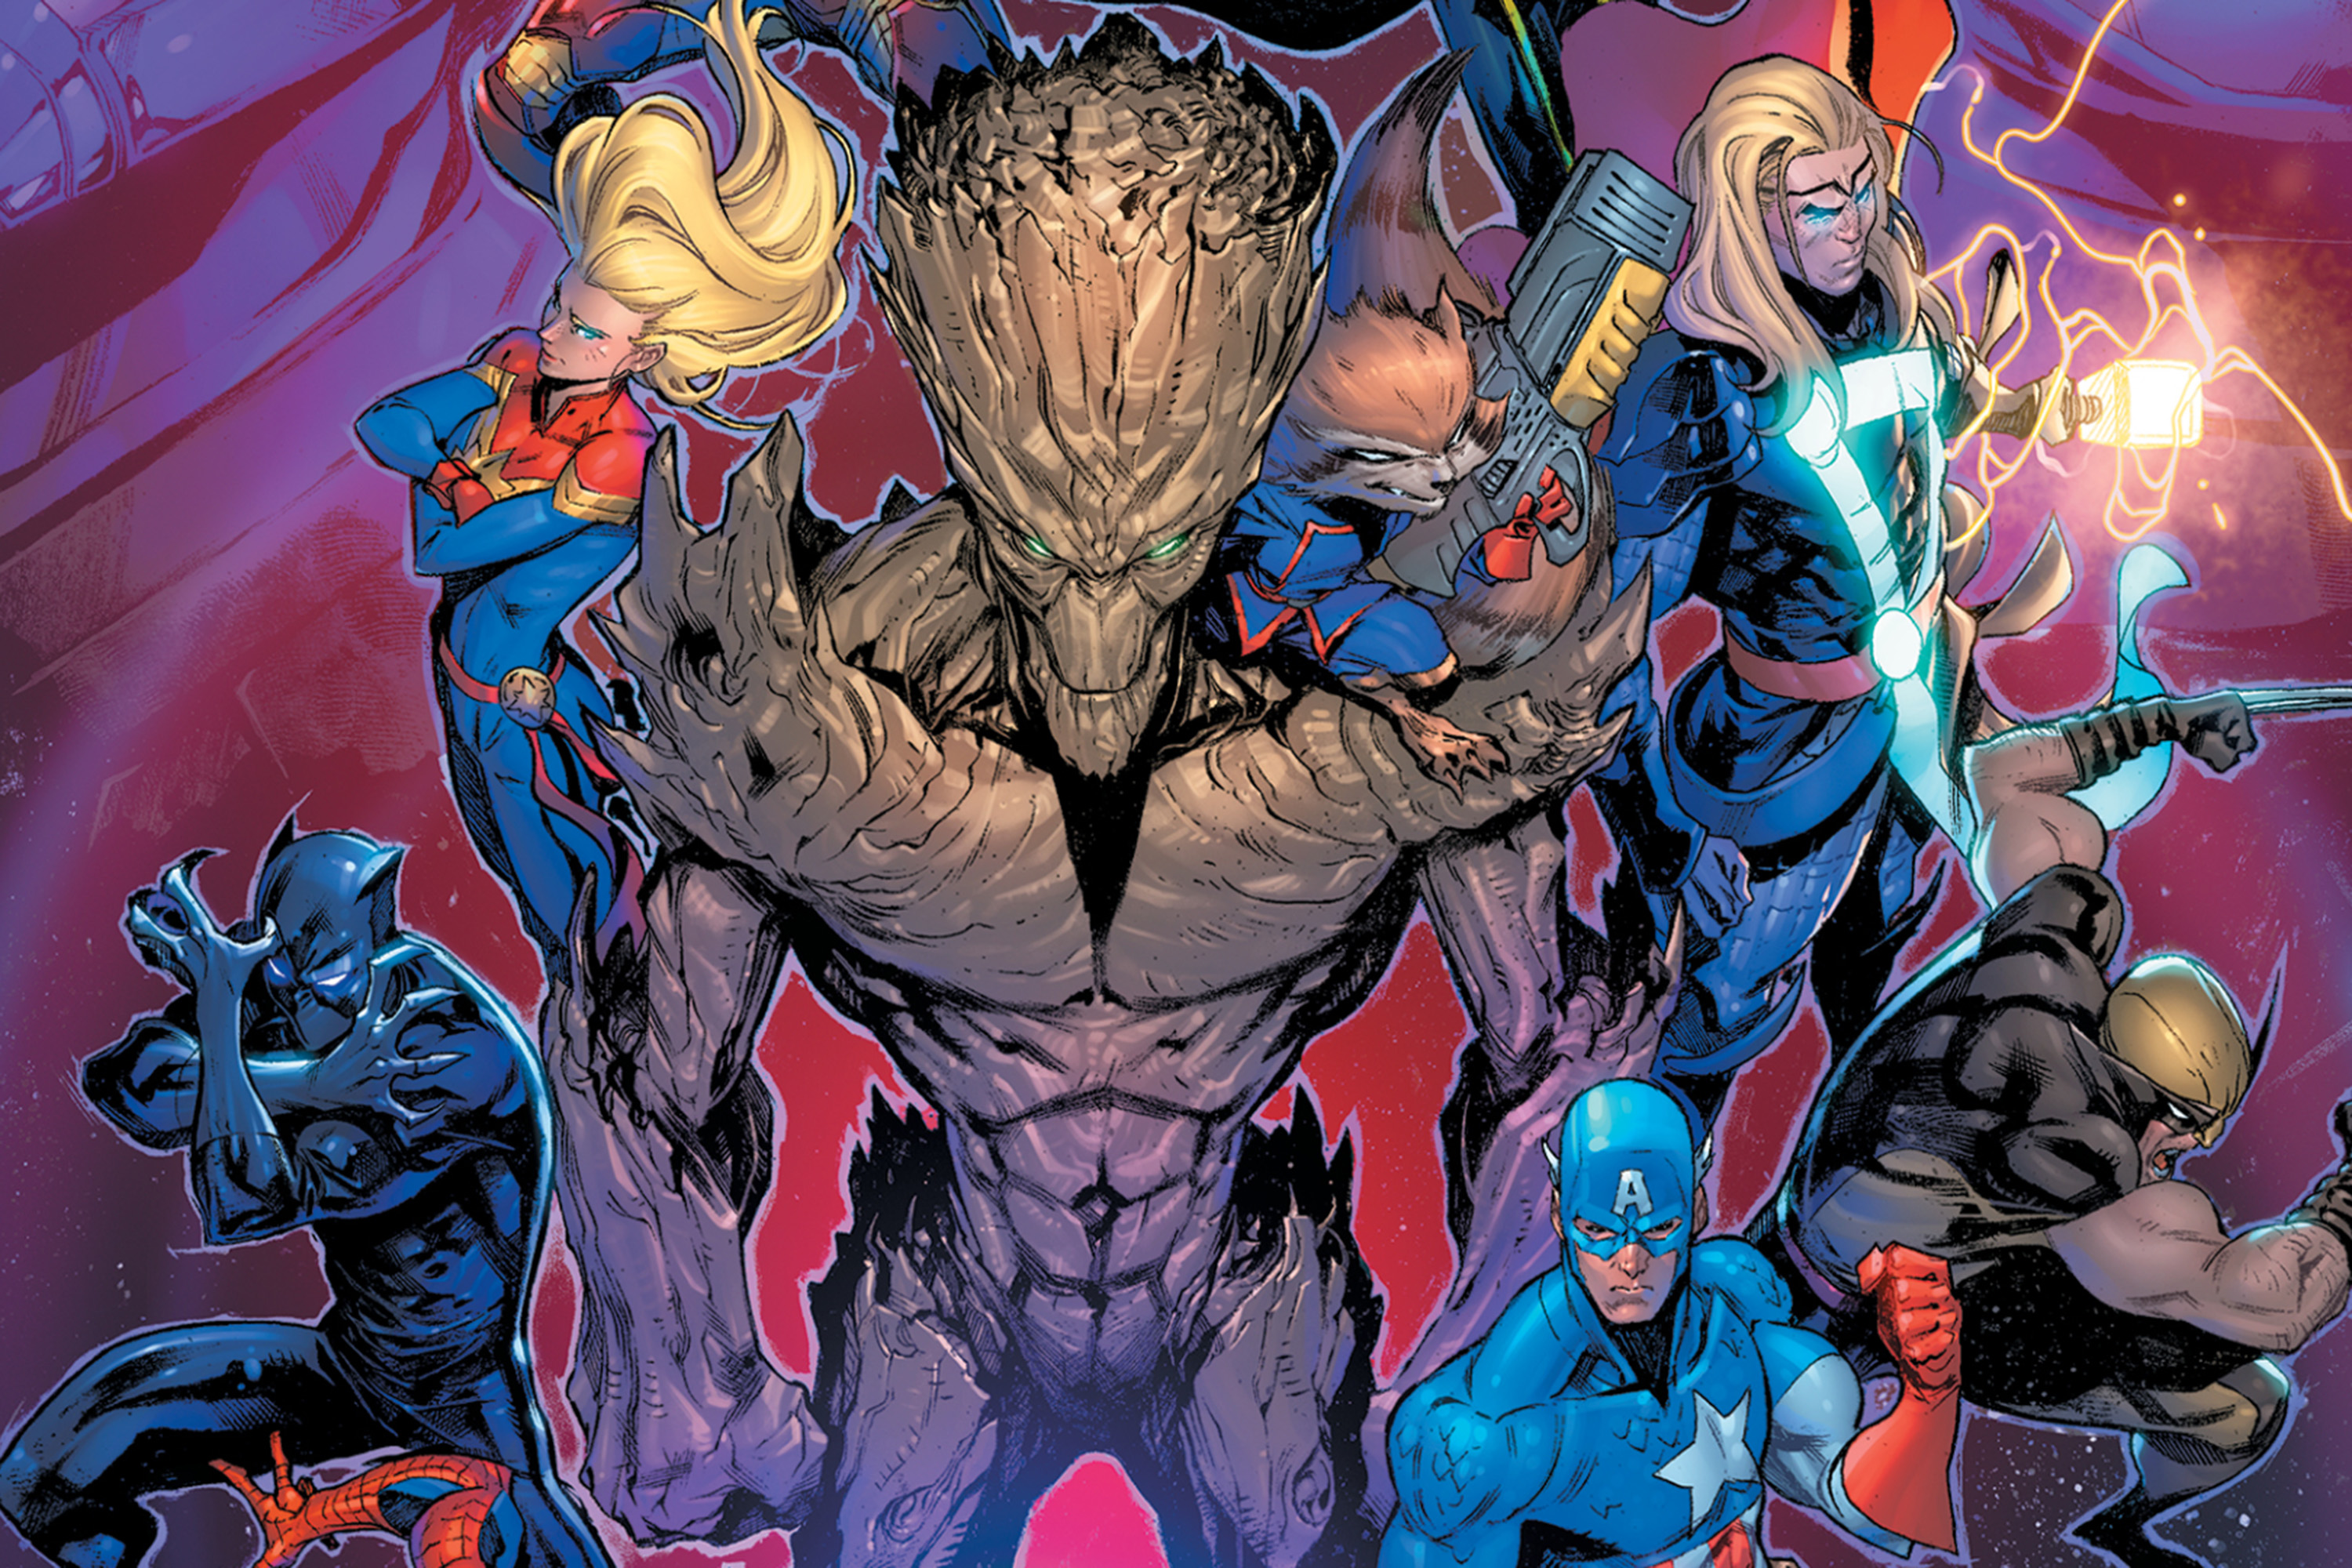 Groot, Rocket, Thor, Captains America and Marvel, Black Panther, and some guy with claws for hands pose for a picture.